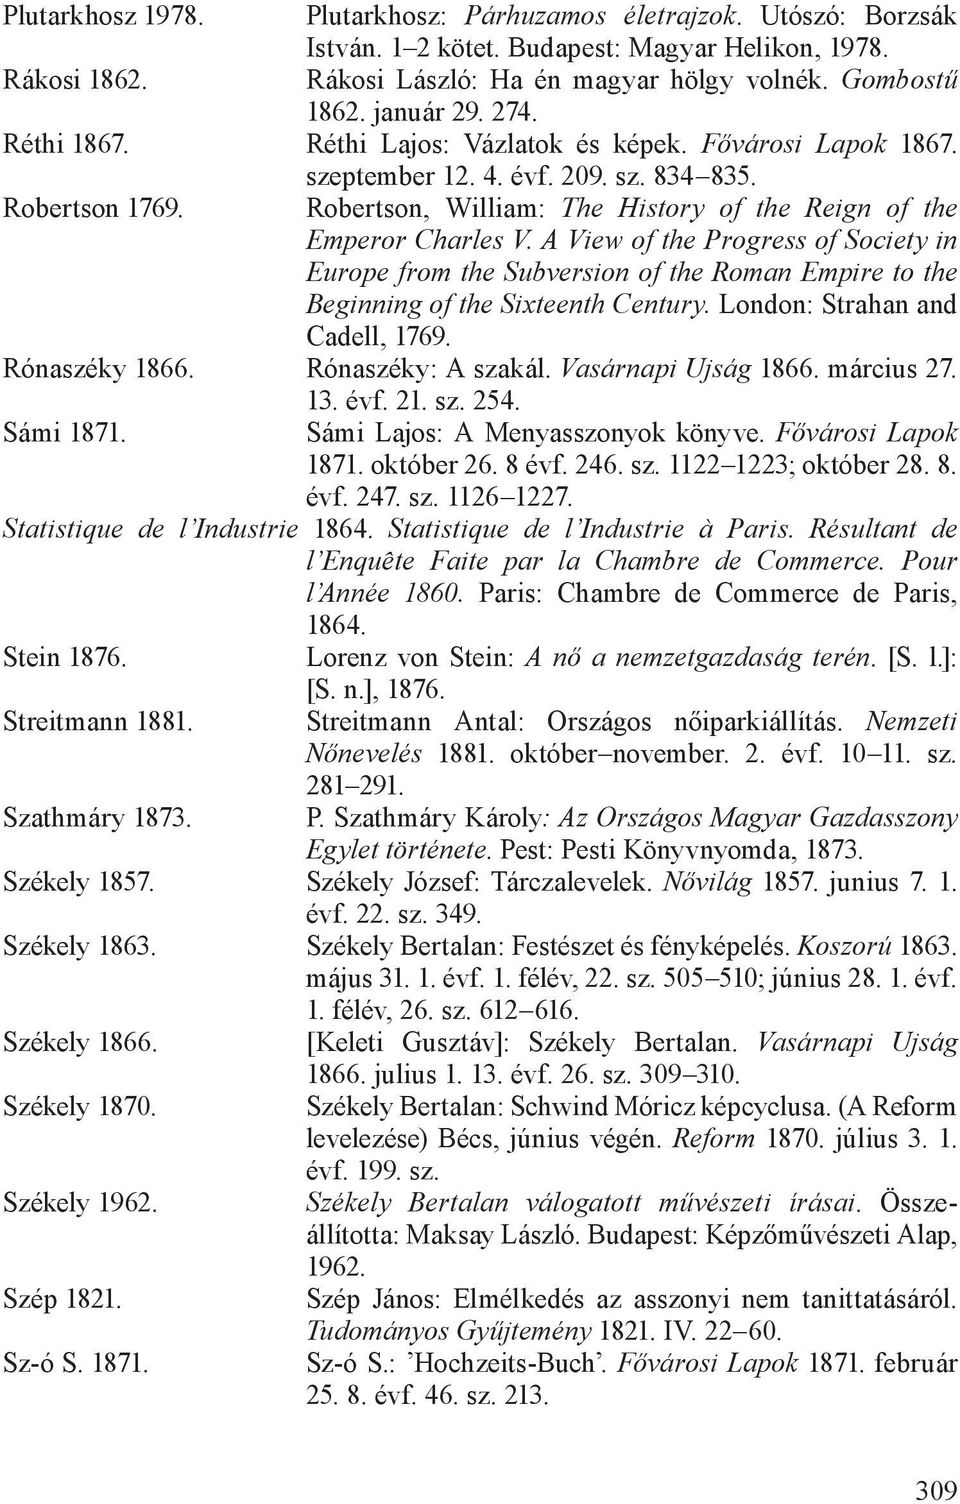 Robertson, William: The History of the Reign of the Emperor Charles V. A View of the Progress of Society in Europe from the Subversion of the Roman Empire to the Beginning of the Sixteenth Century.